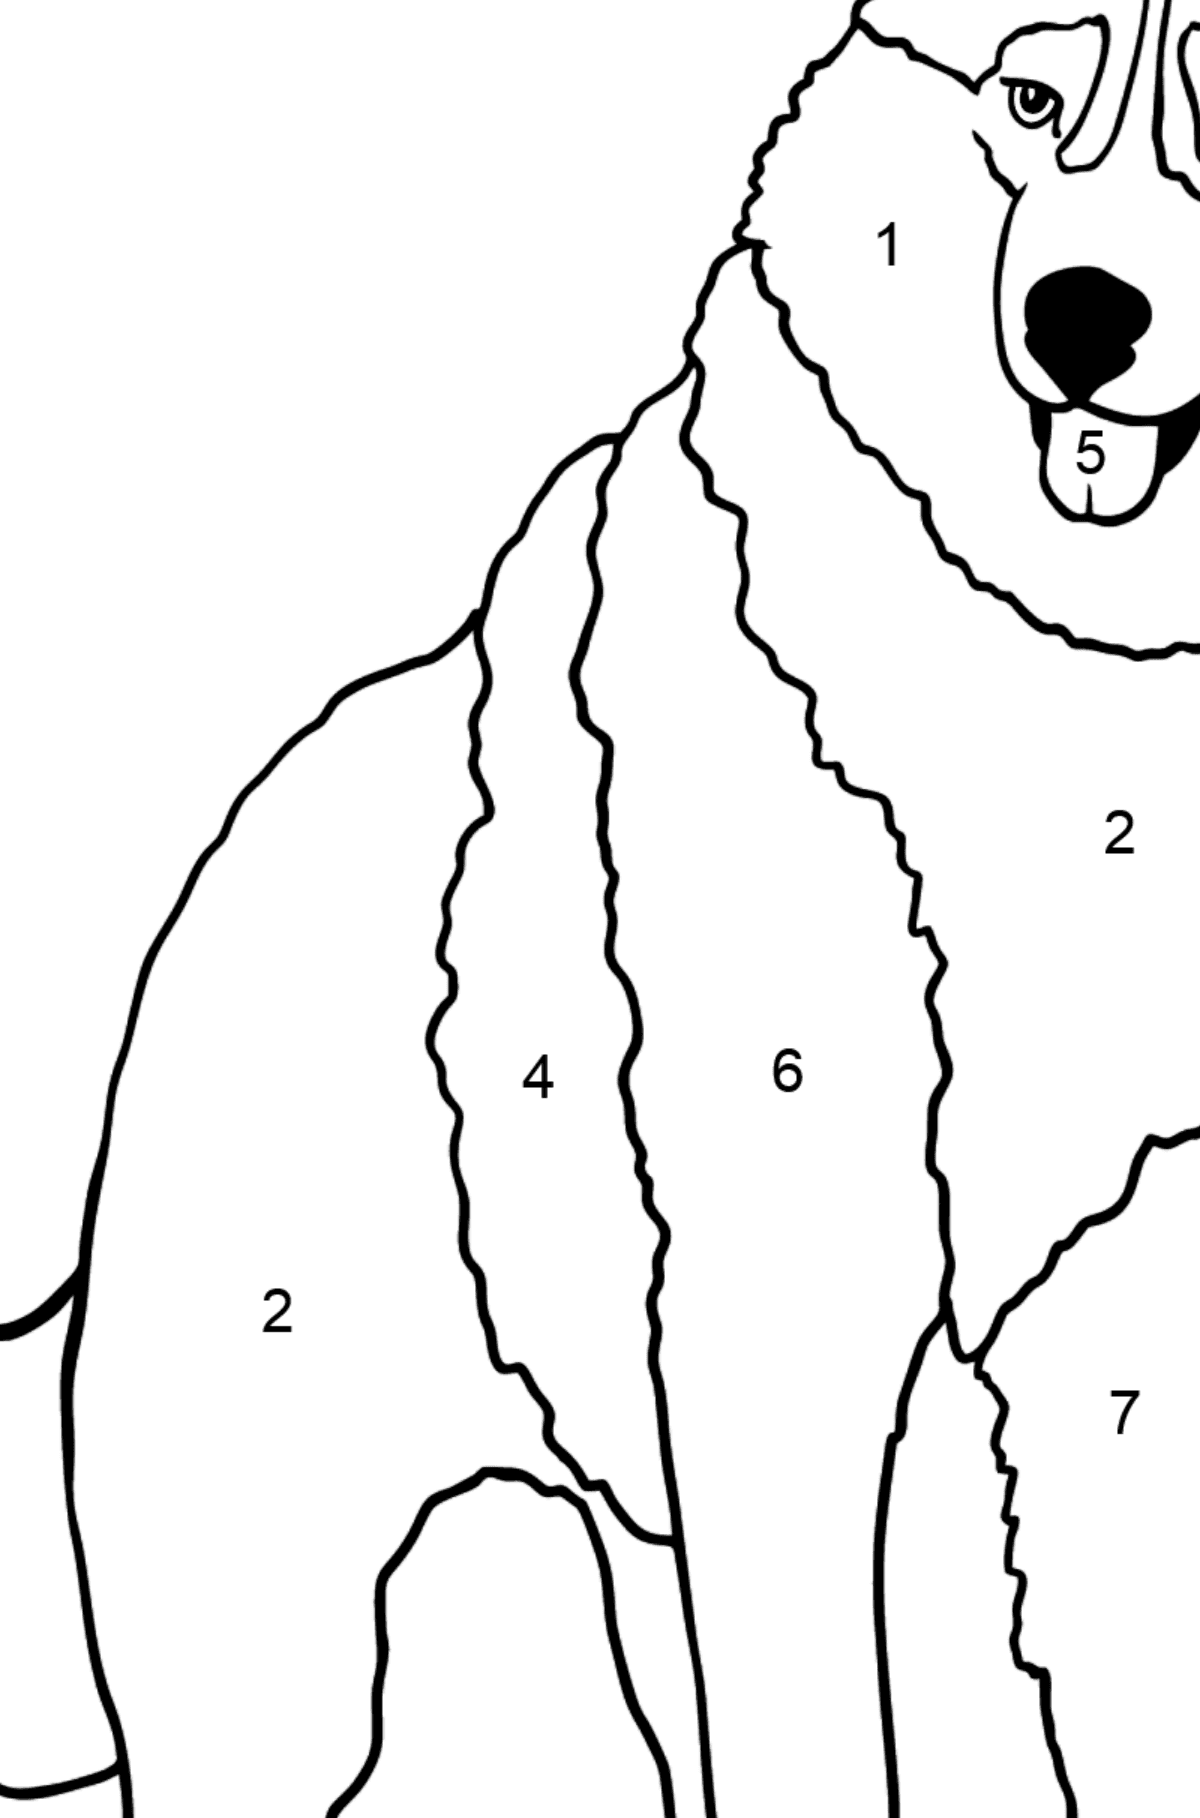 Husky coloring page - Coloring by Numbers for Kids